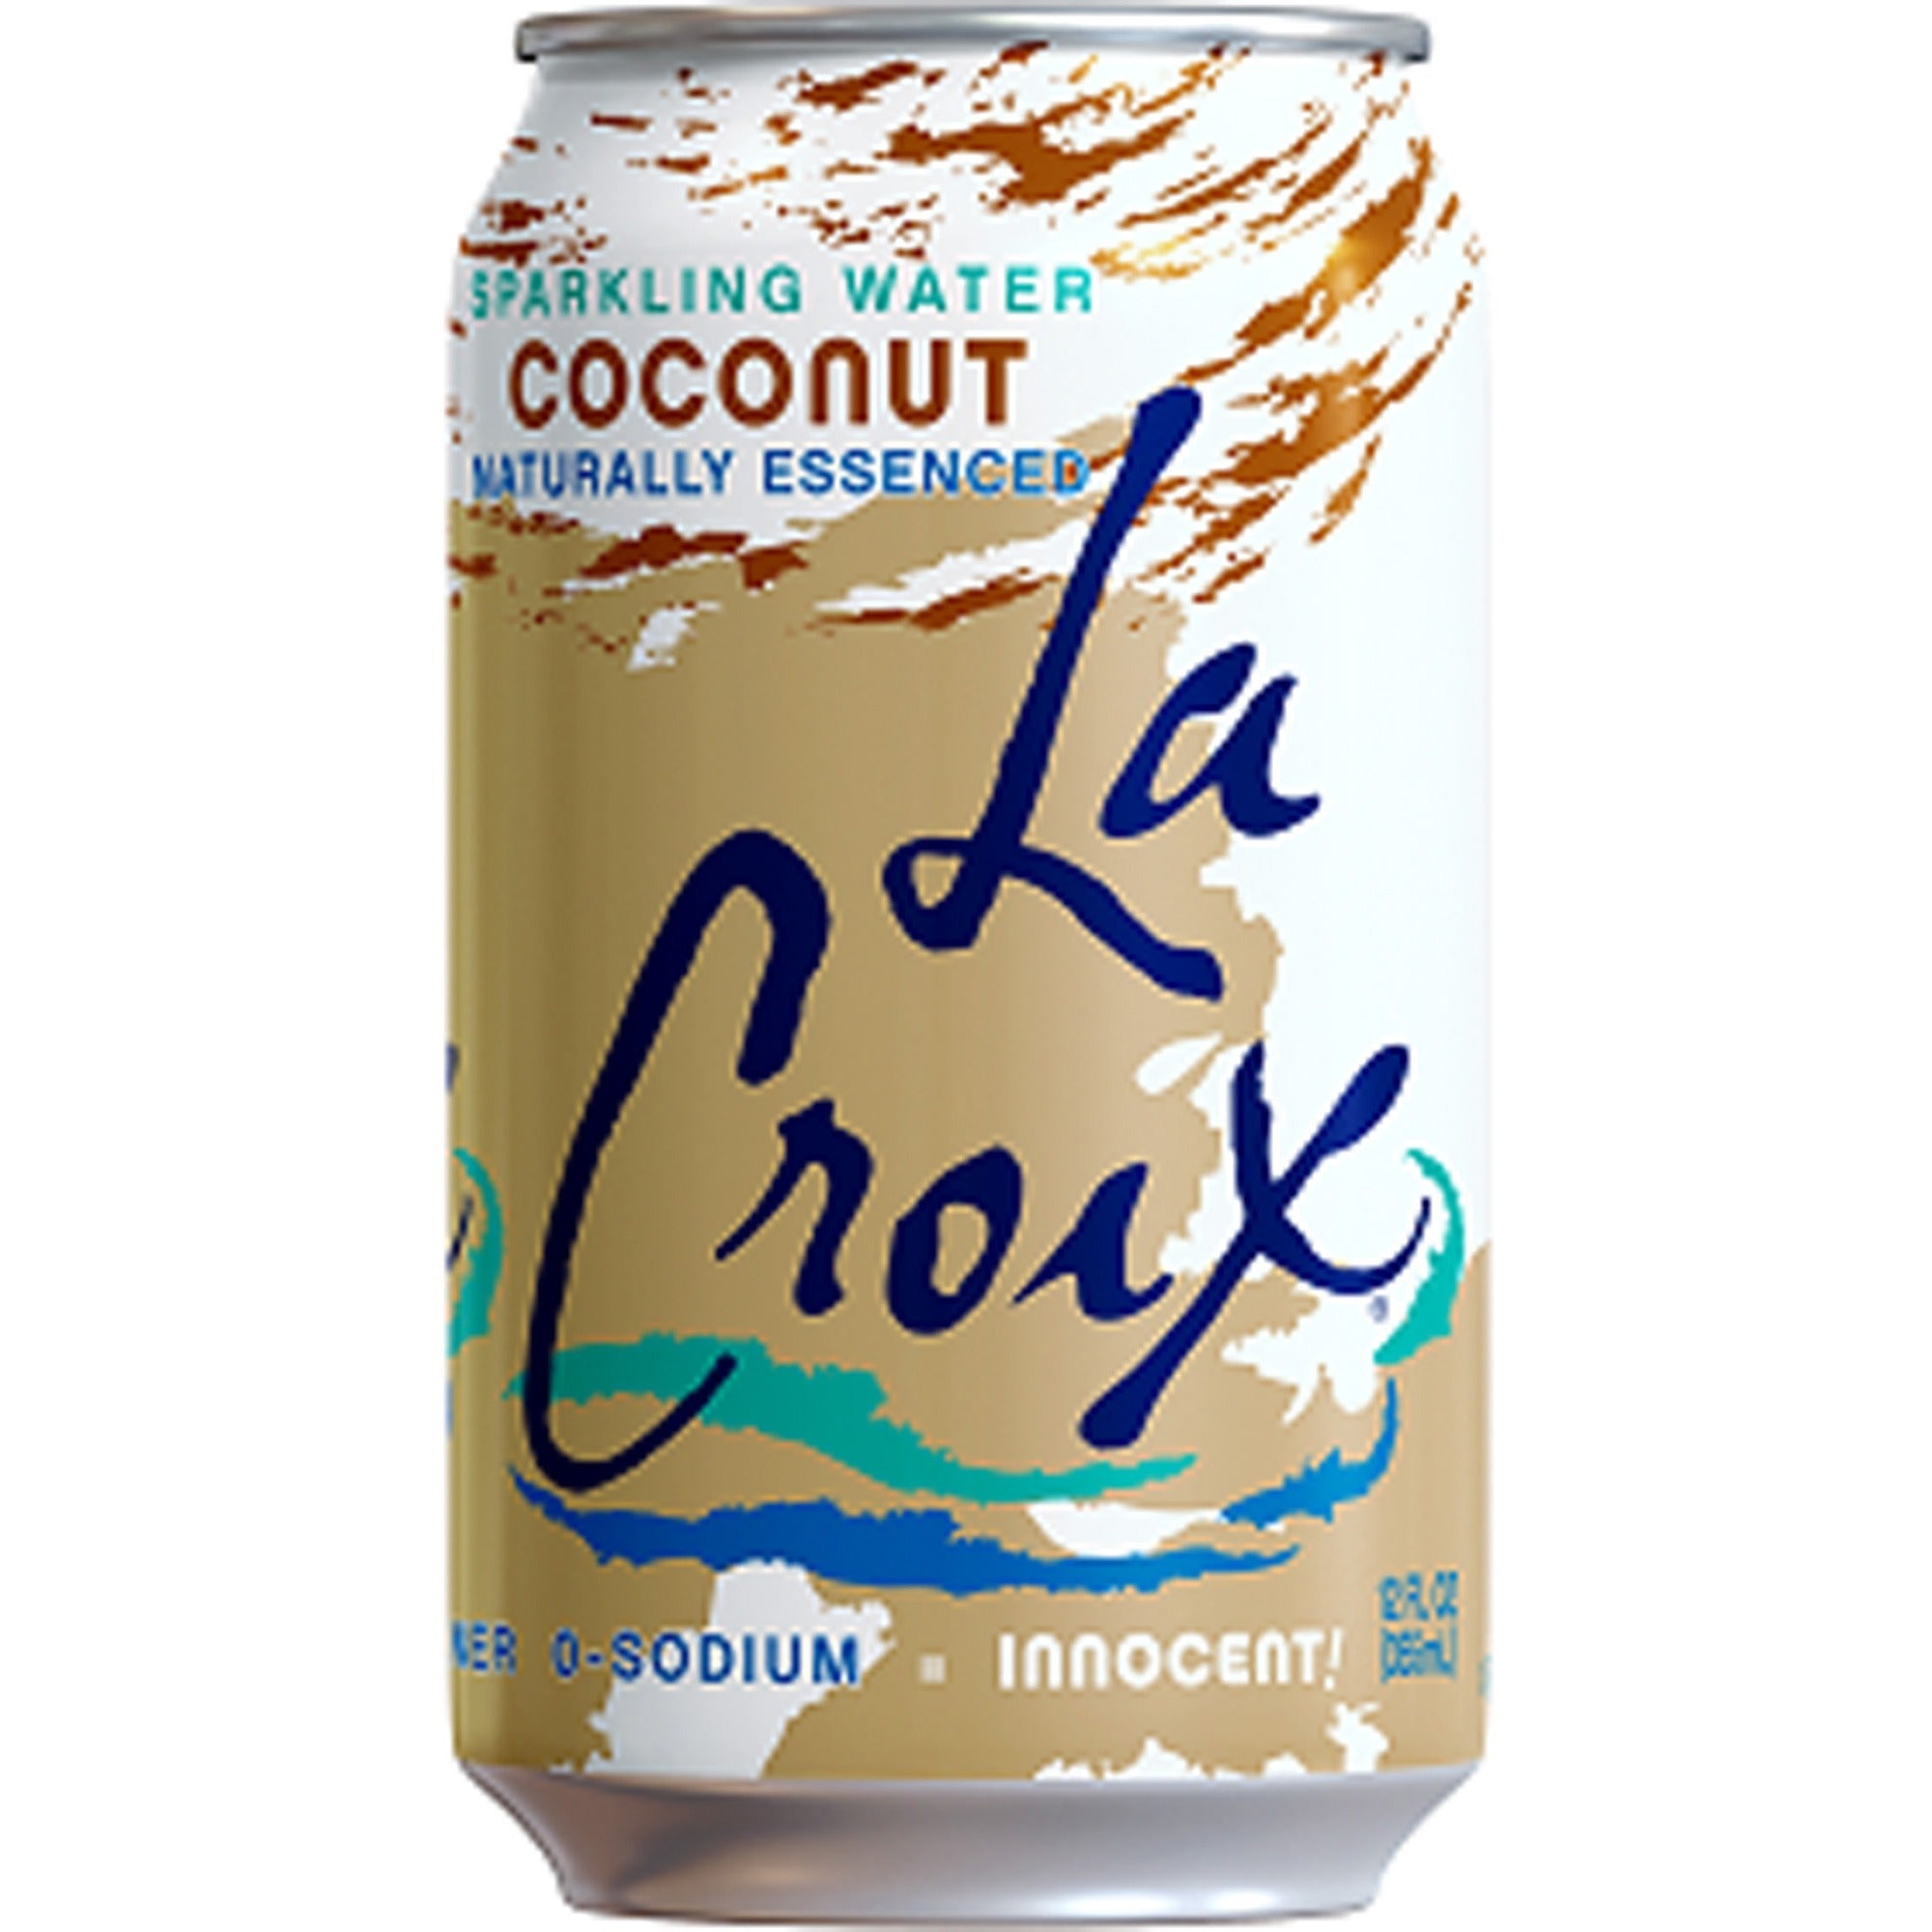 lacroix-coconut-flavored-sparkling-water-ready-to-drink-12-fl-oz-355-ml-2-carton-can_lcx40121 - 1